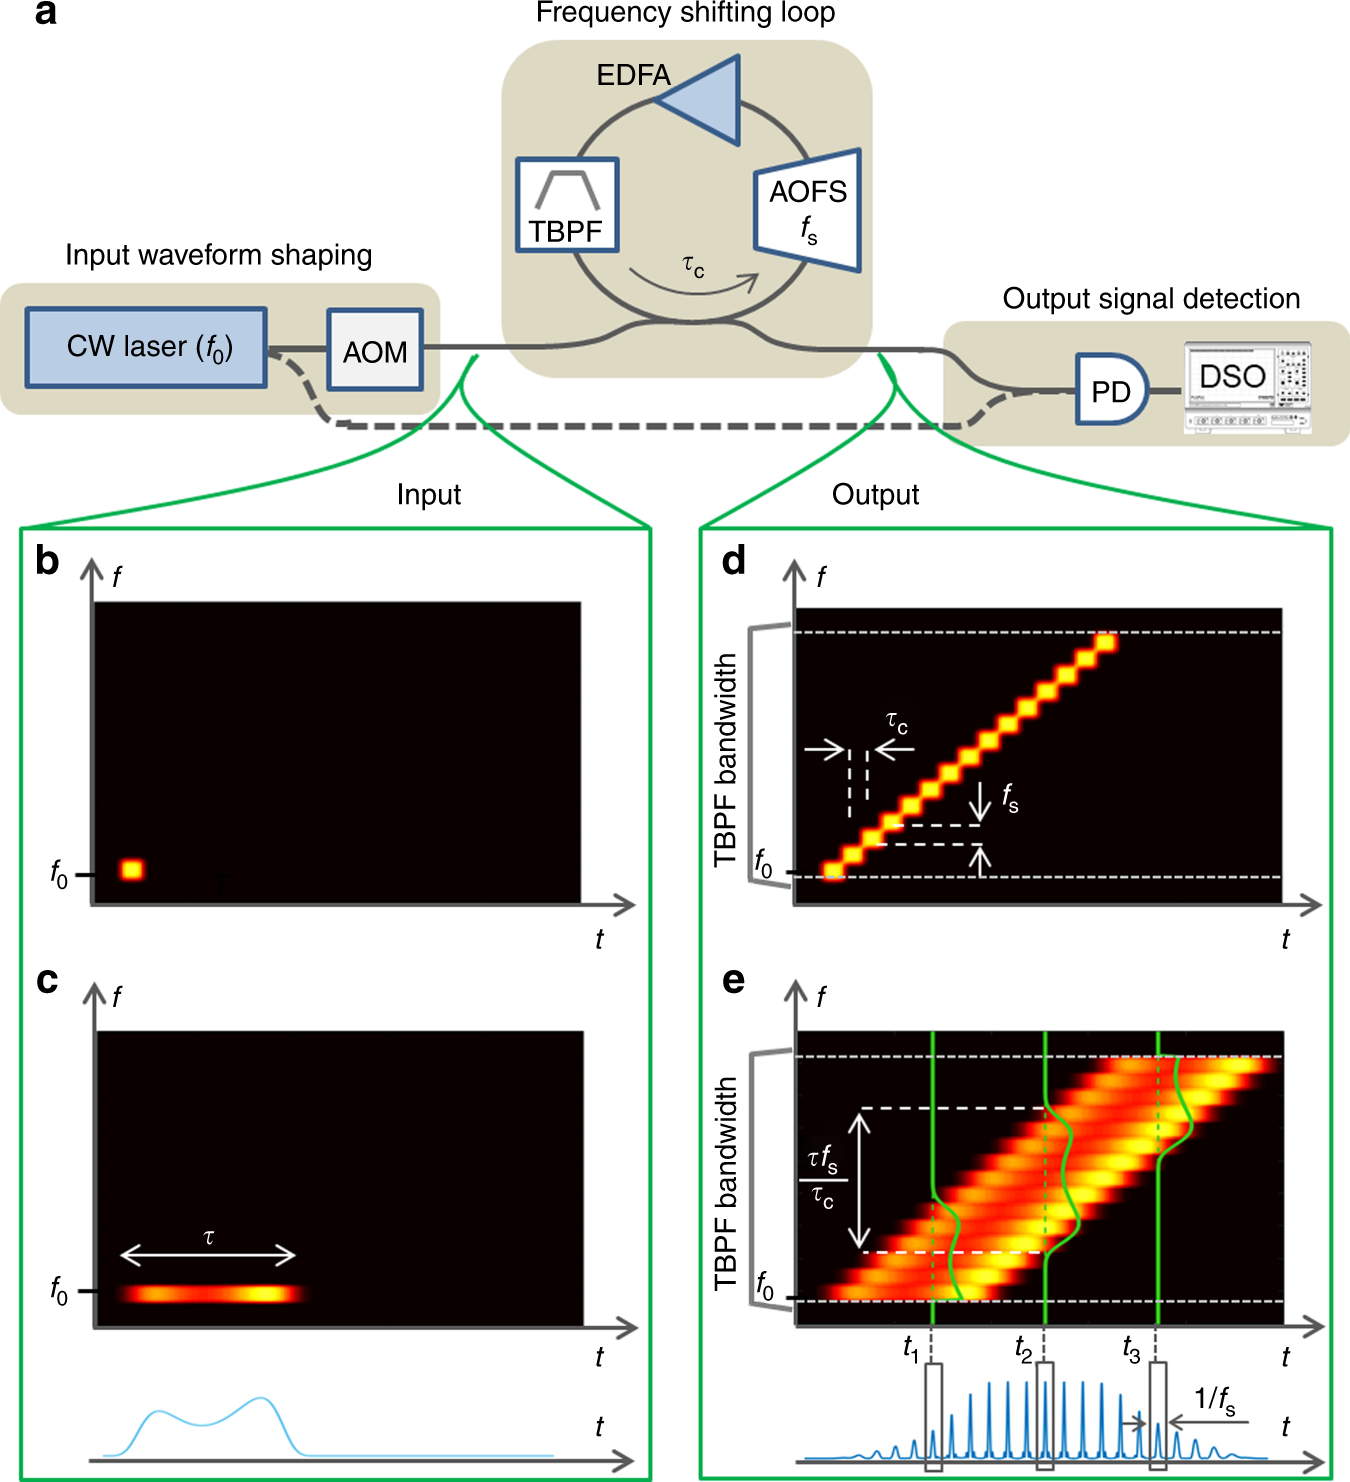 Programmable broadband optical field spectral shaping with megahertz  resolution using a simple frequency shifting loop | Nature Communications